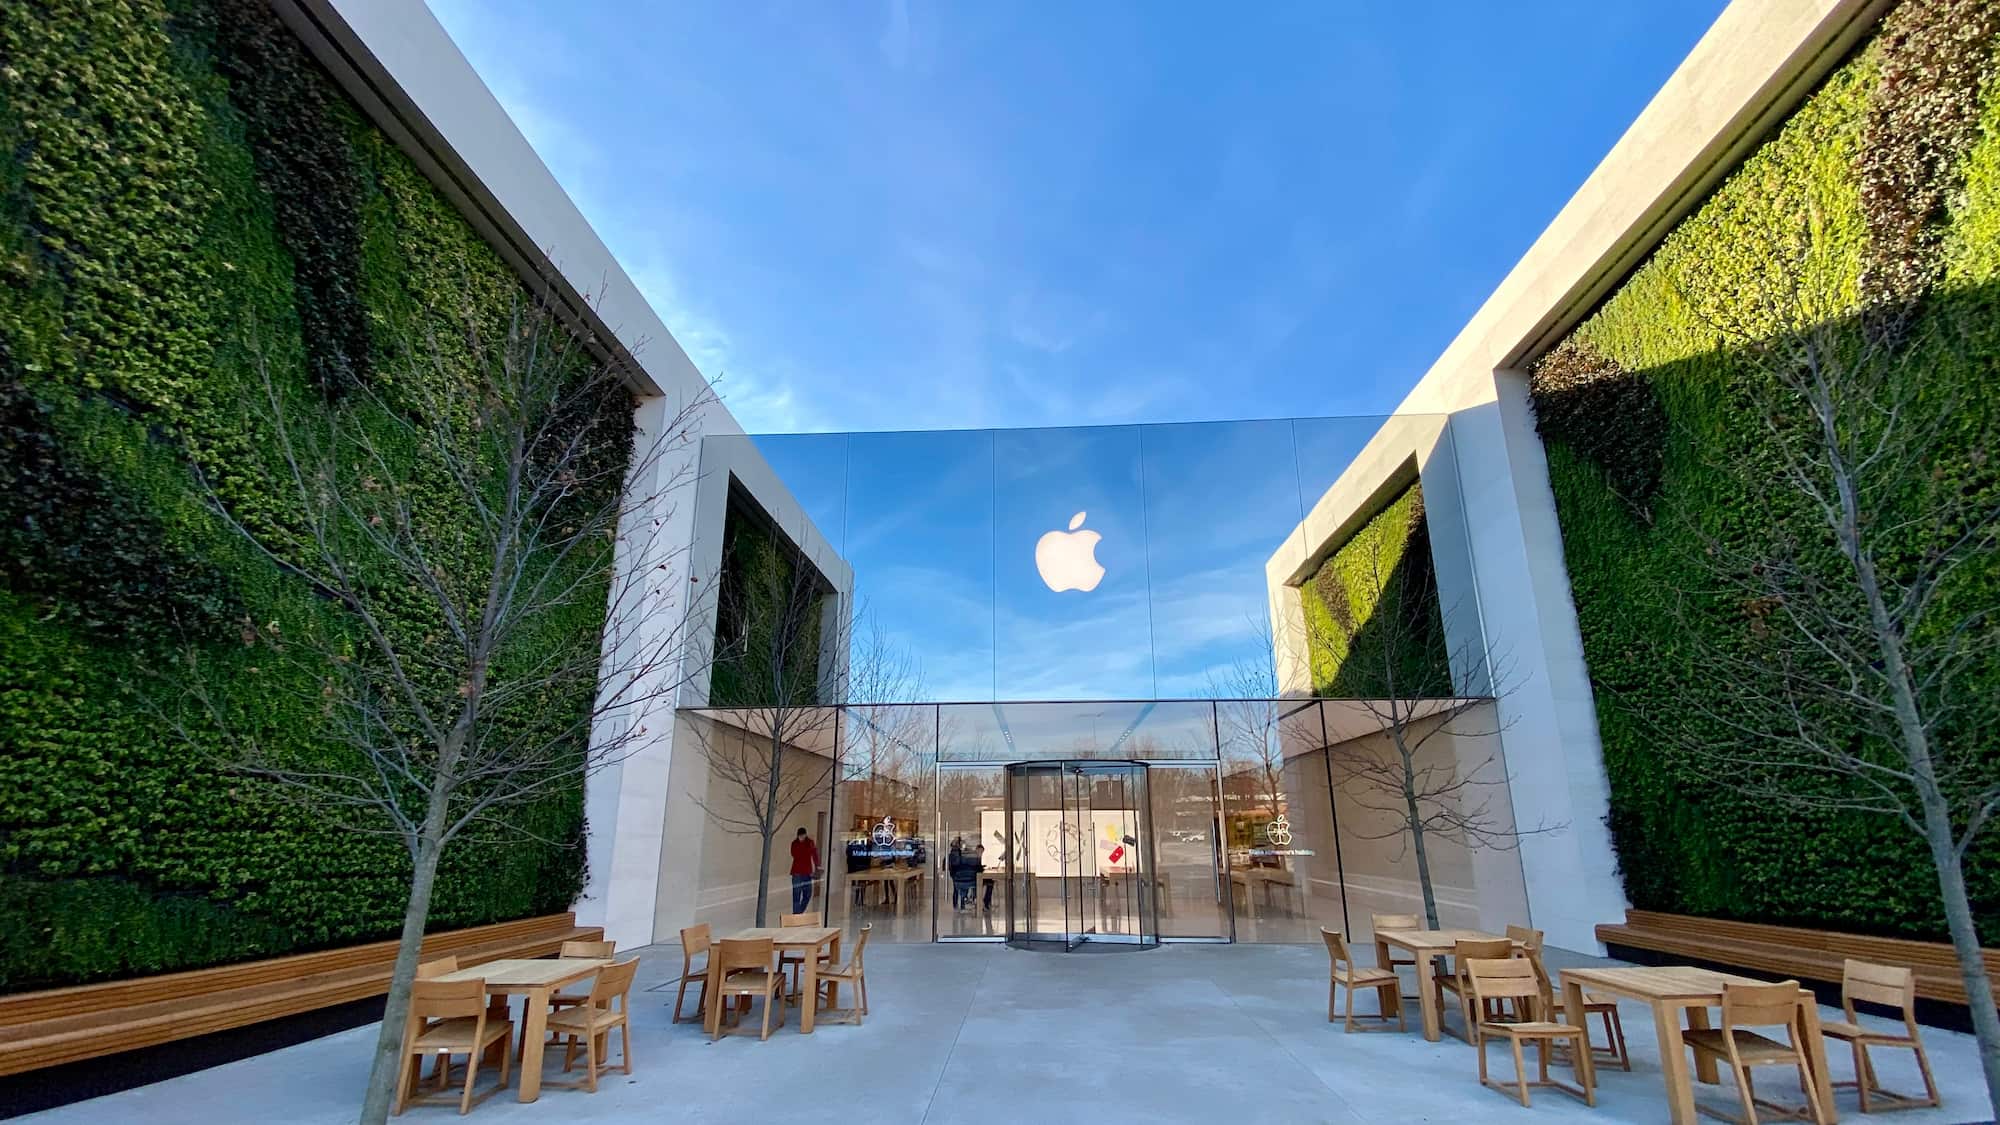 Apple Stores prep for iPhone 15 and USB-C, bigger focus on in-store setup, more